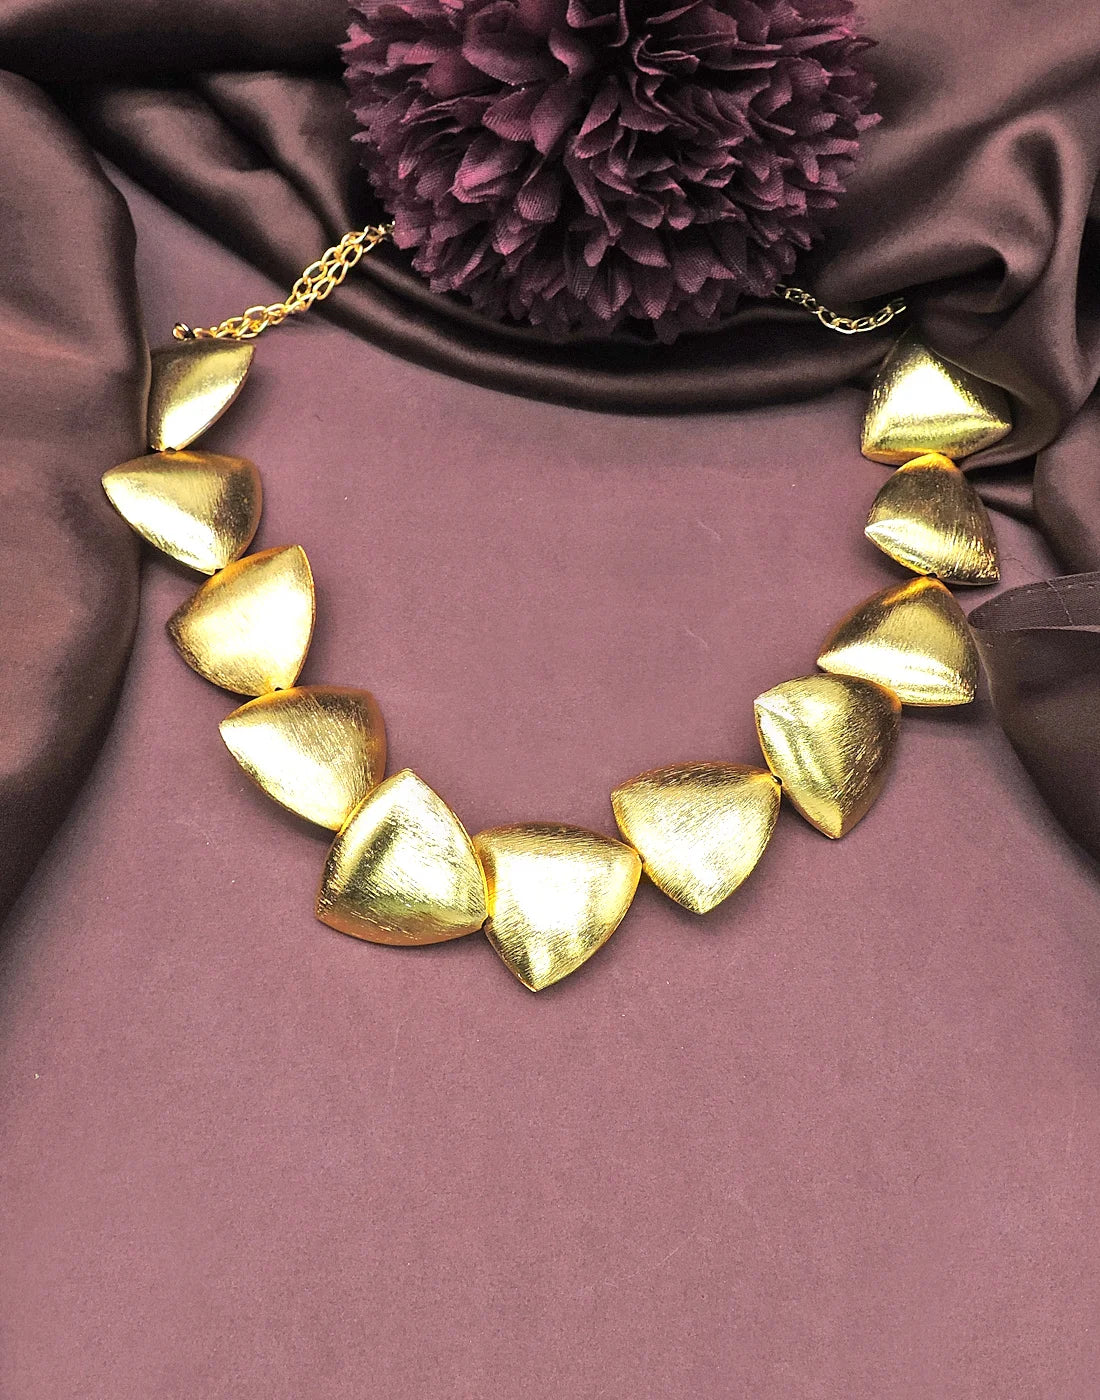 Rounded Triangle Necklace- Handcrafted Jewellery from Dori